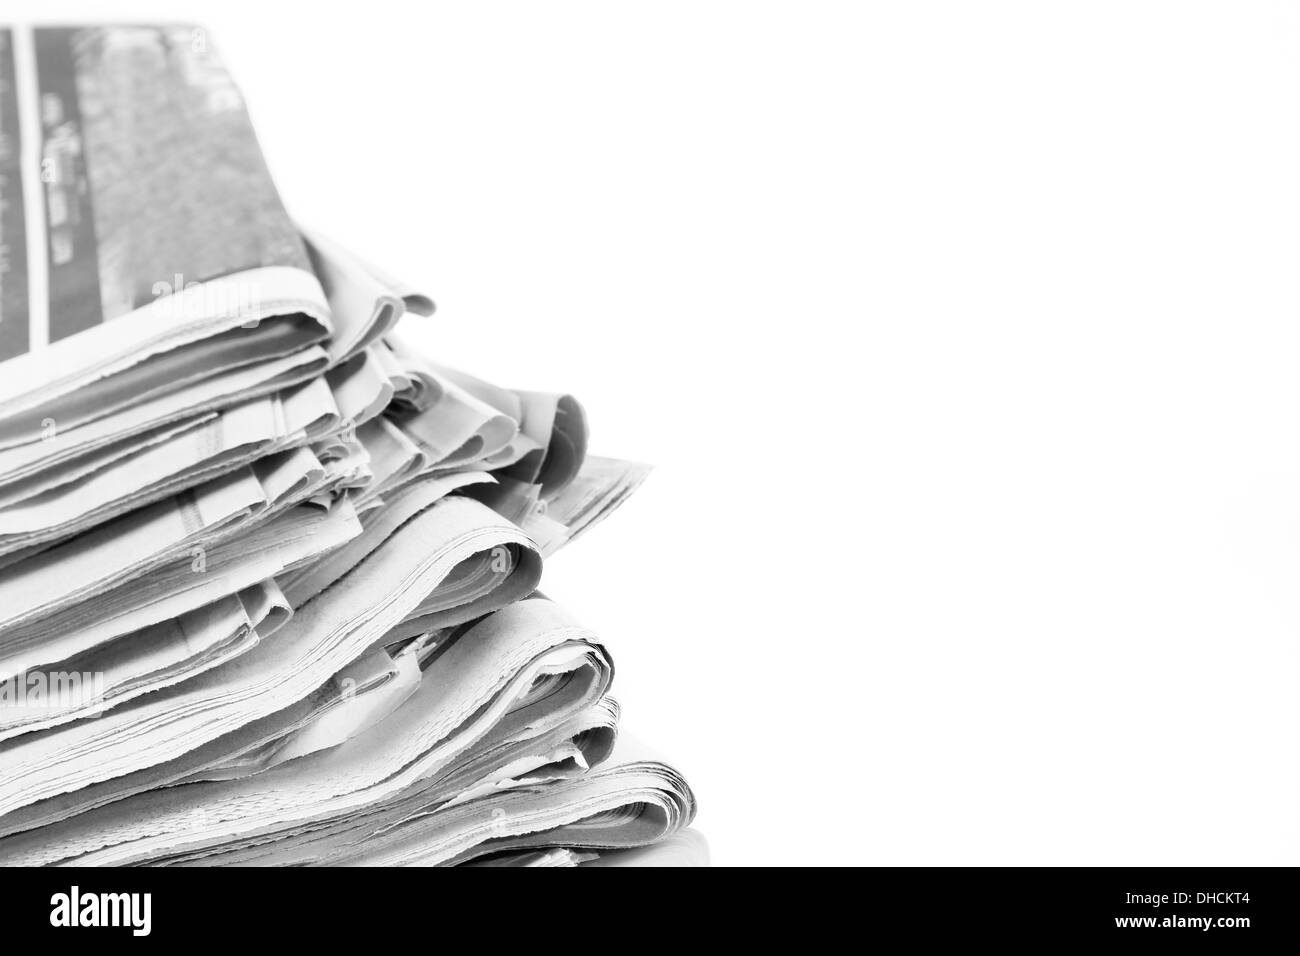 Closeup Of Newspapers On Plain Background Stock Photo Alamy